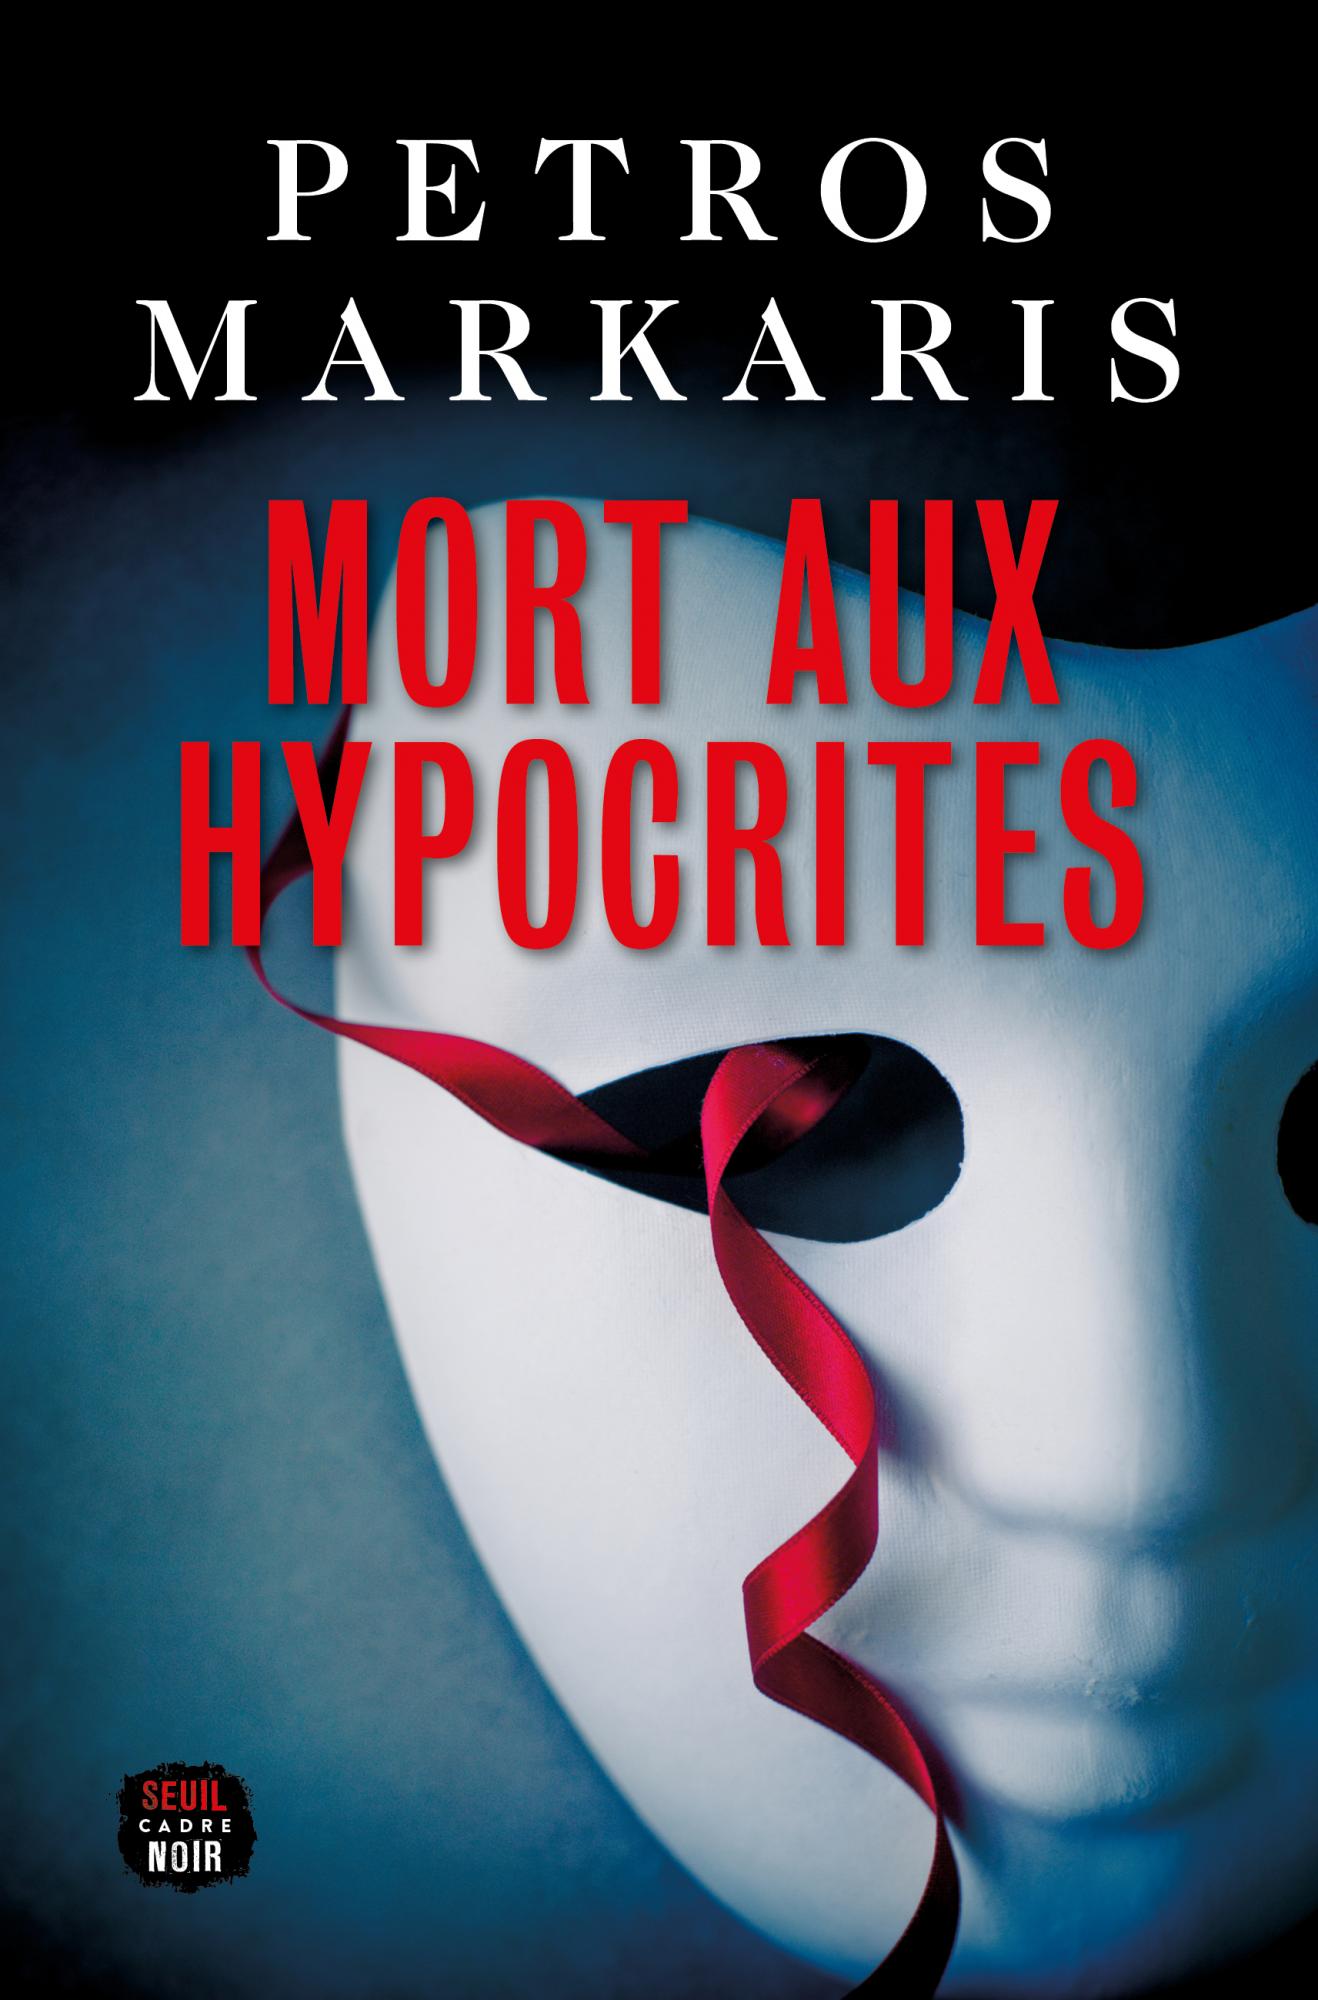 Now published in translation: Times of Hypocrisy by Petros Markaris in French